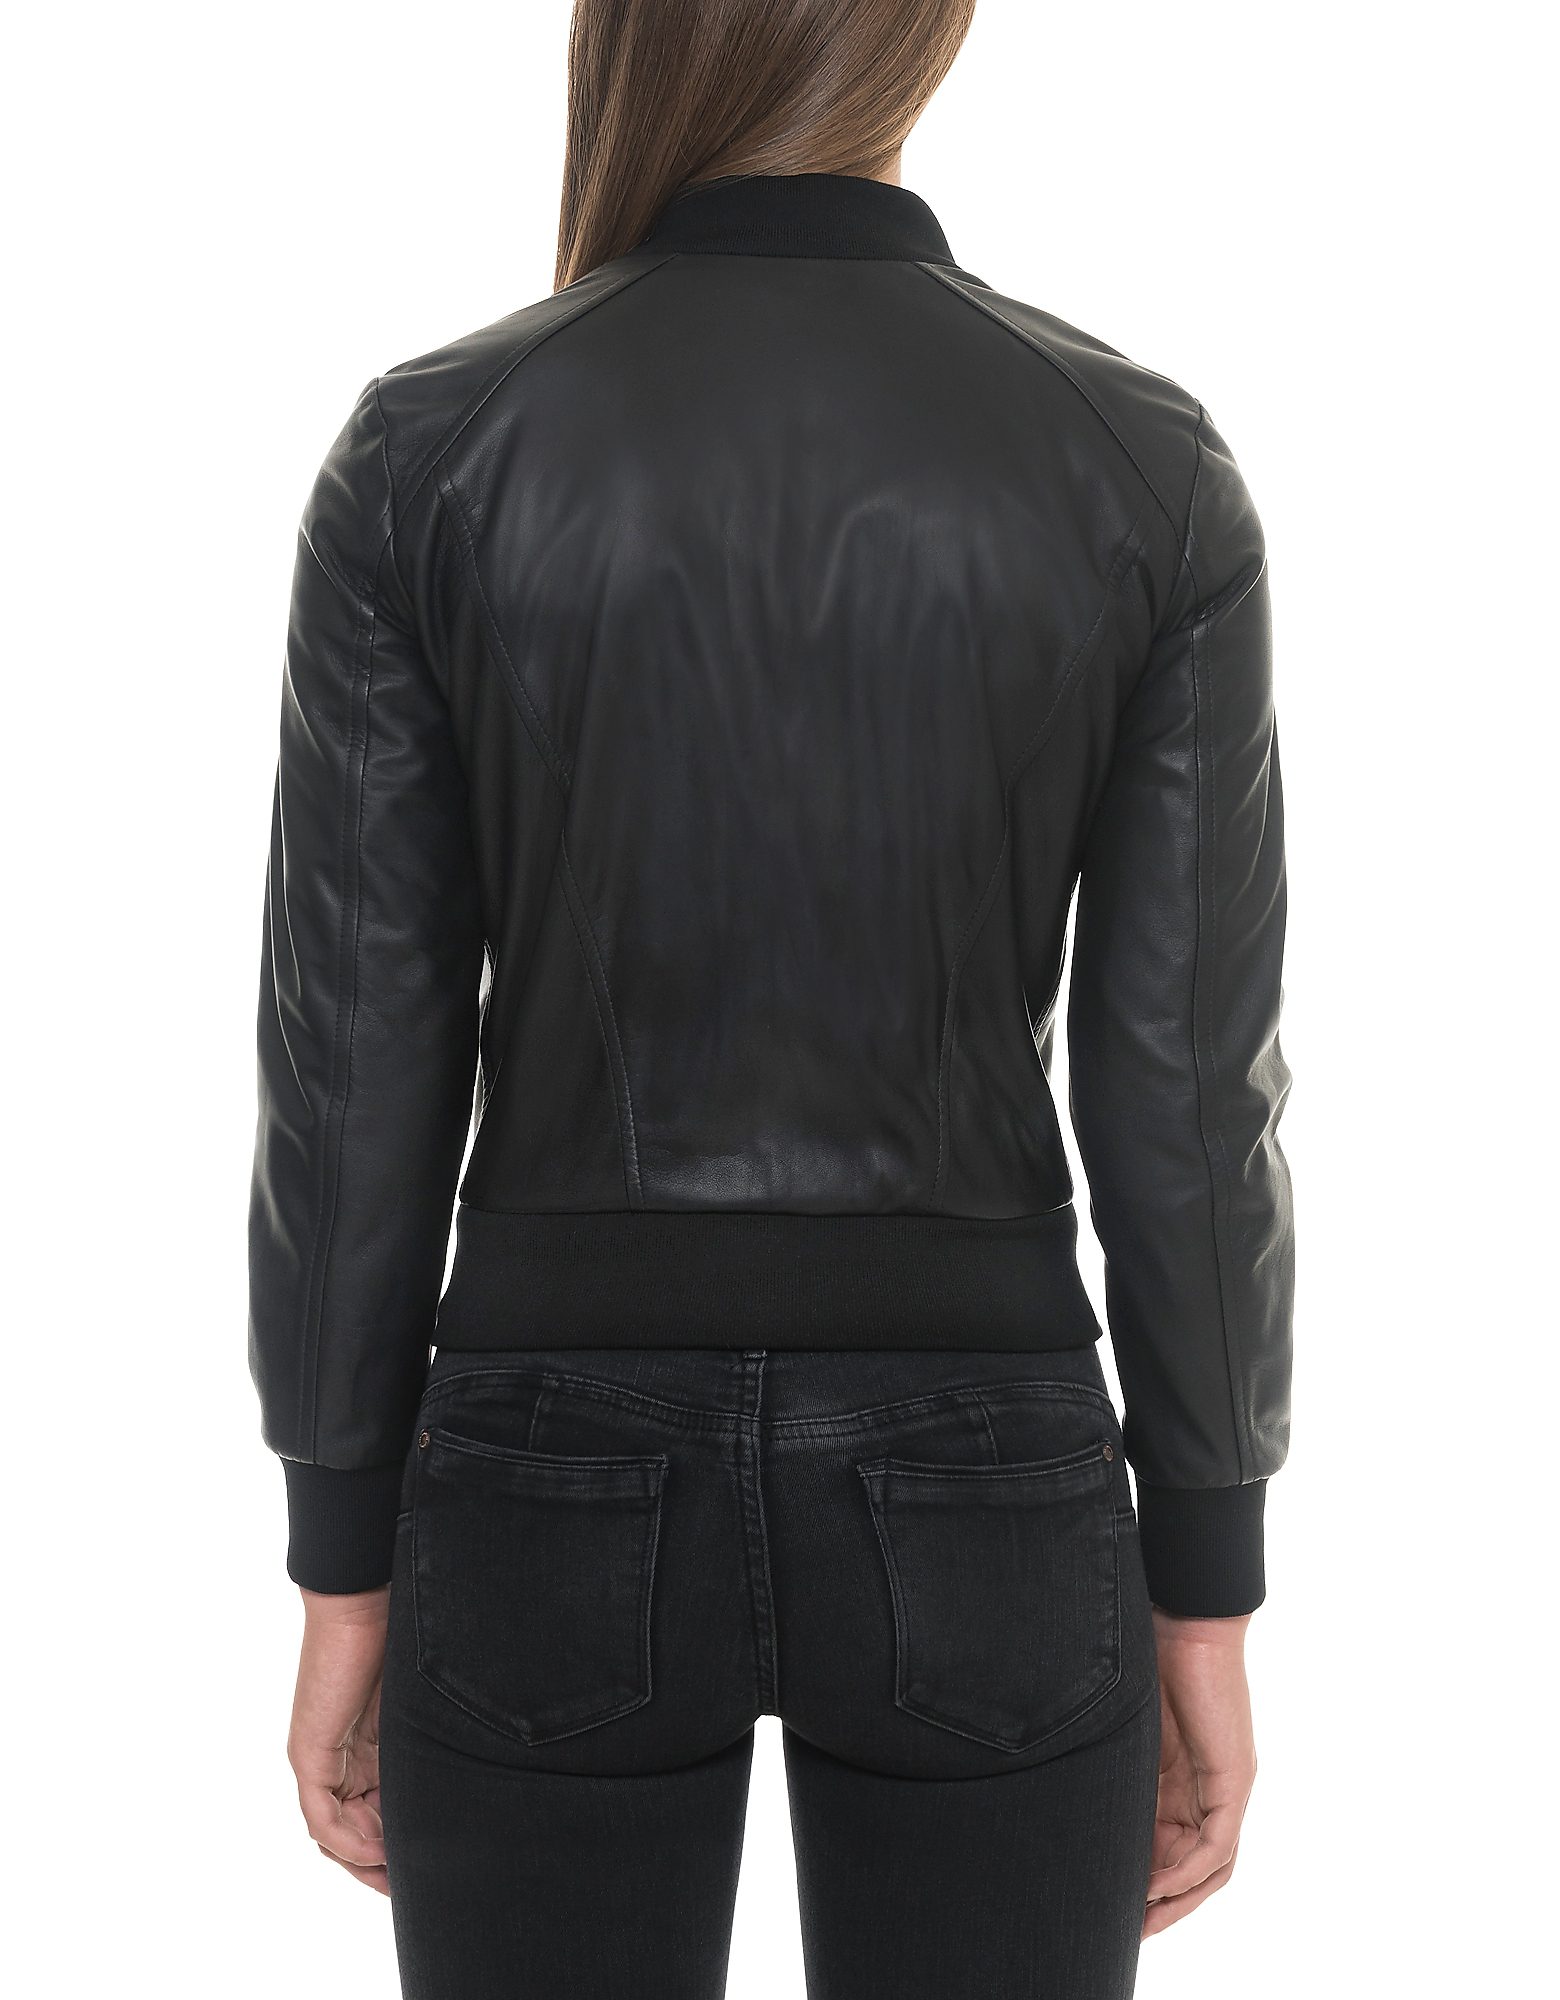 Genuine Black leather women bomber jackets for sale